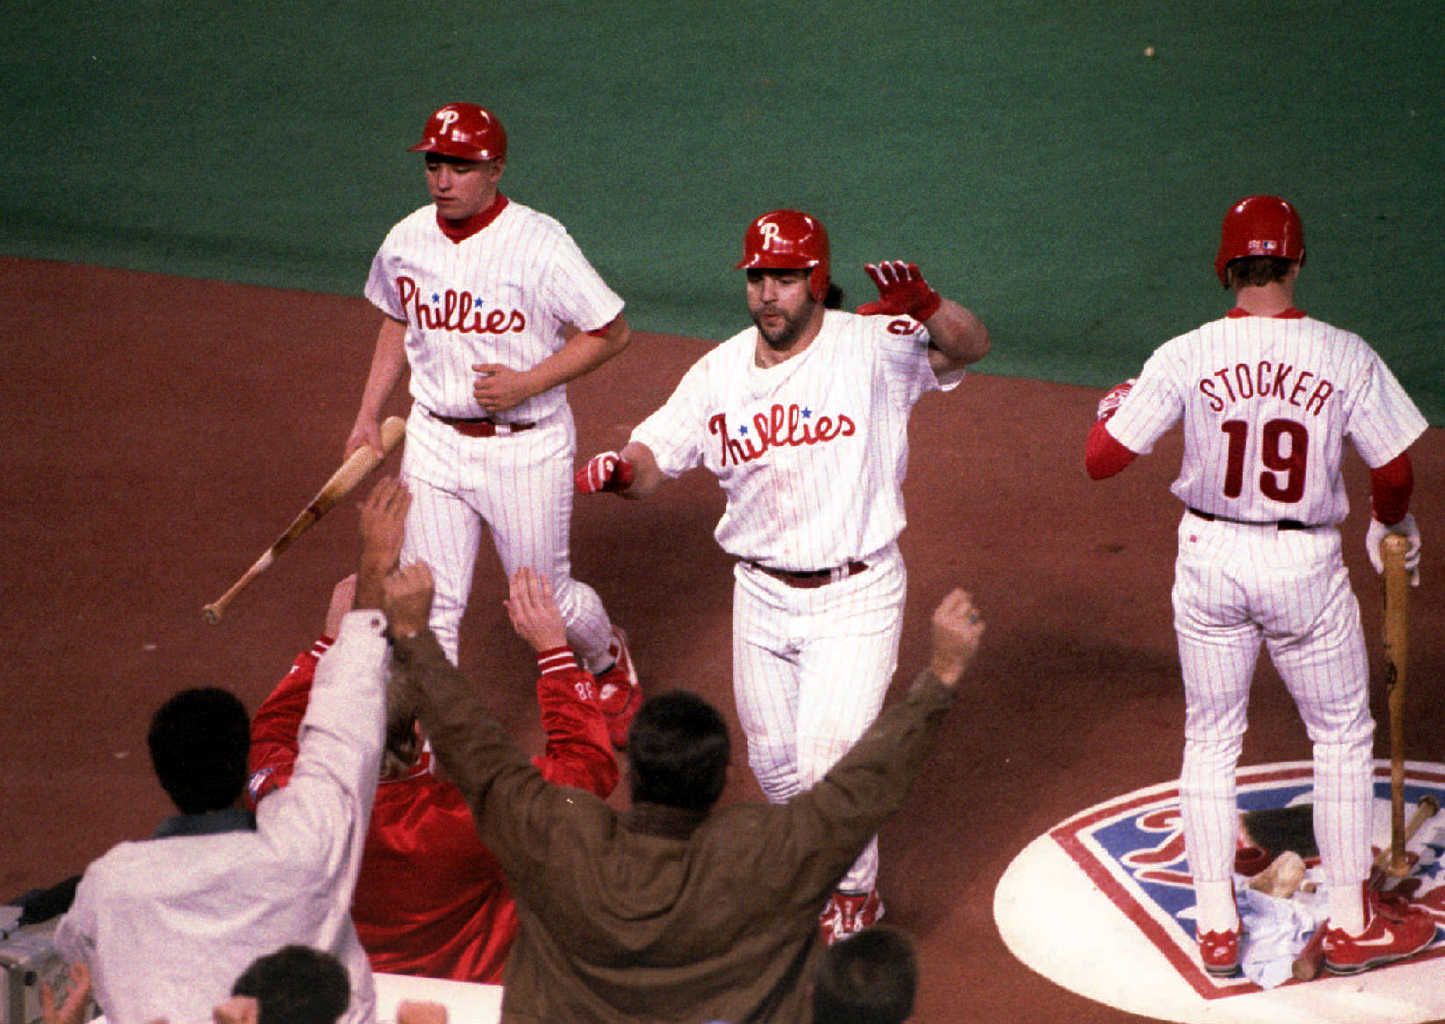 Dave Hollins days until Opening Day : r/phillies